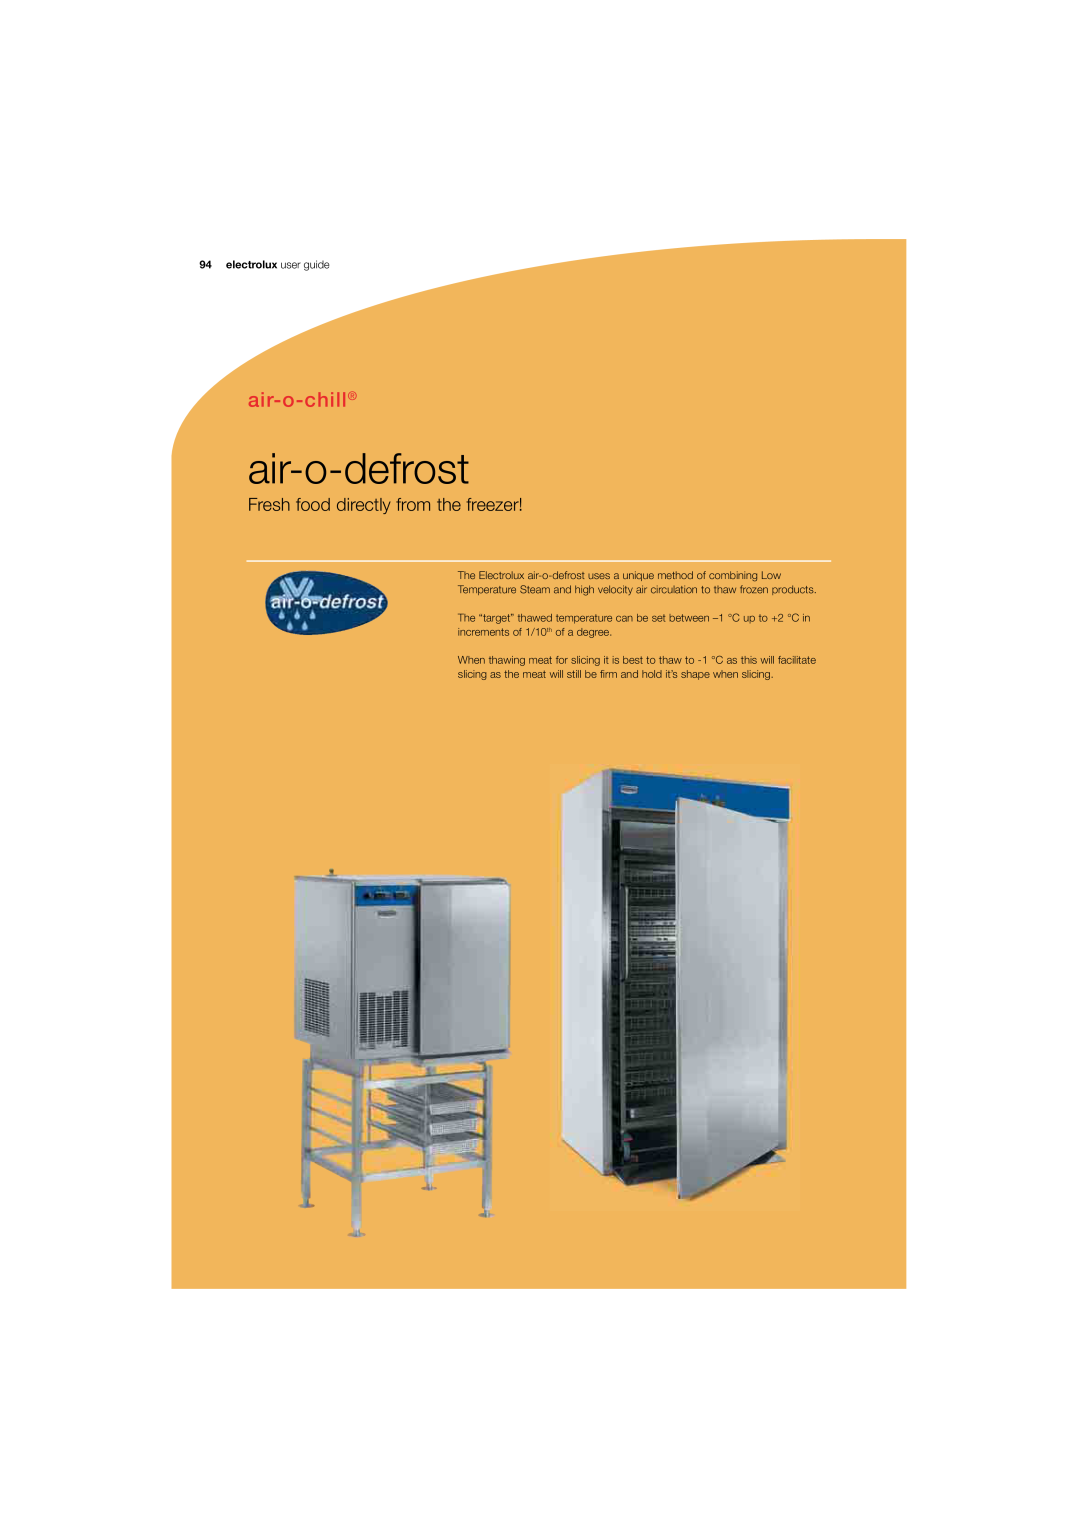 Electrolux 180 manual air-o-defrost, air-o-chill, Fresh food directly from the freezer, electrolux user guide 